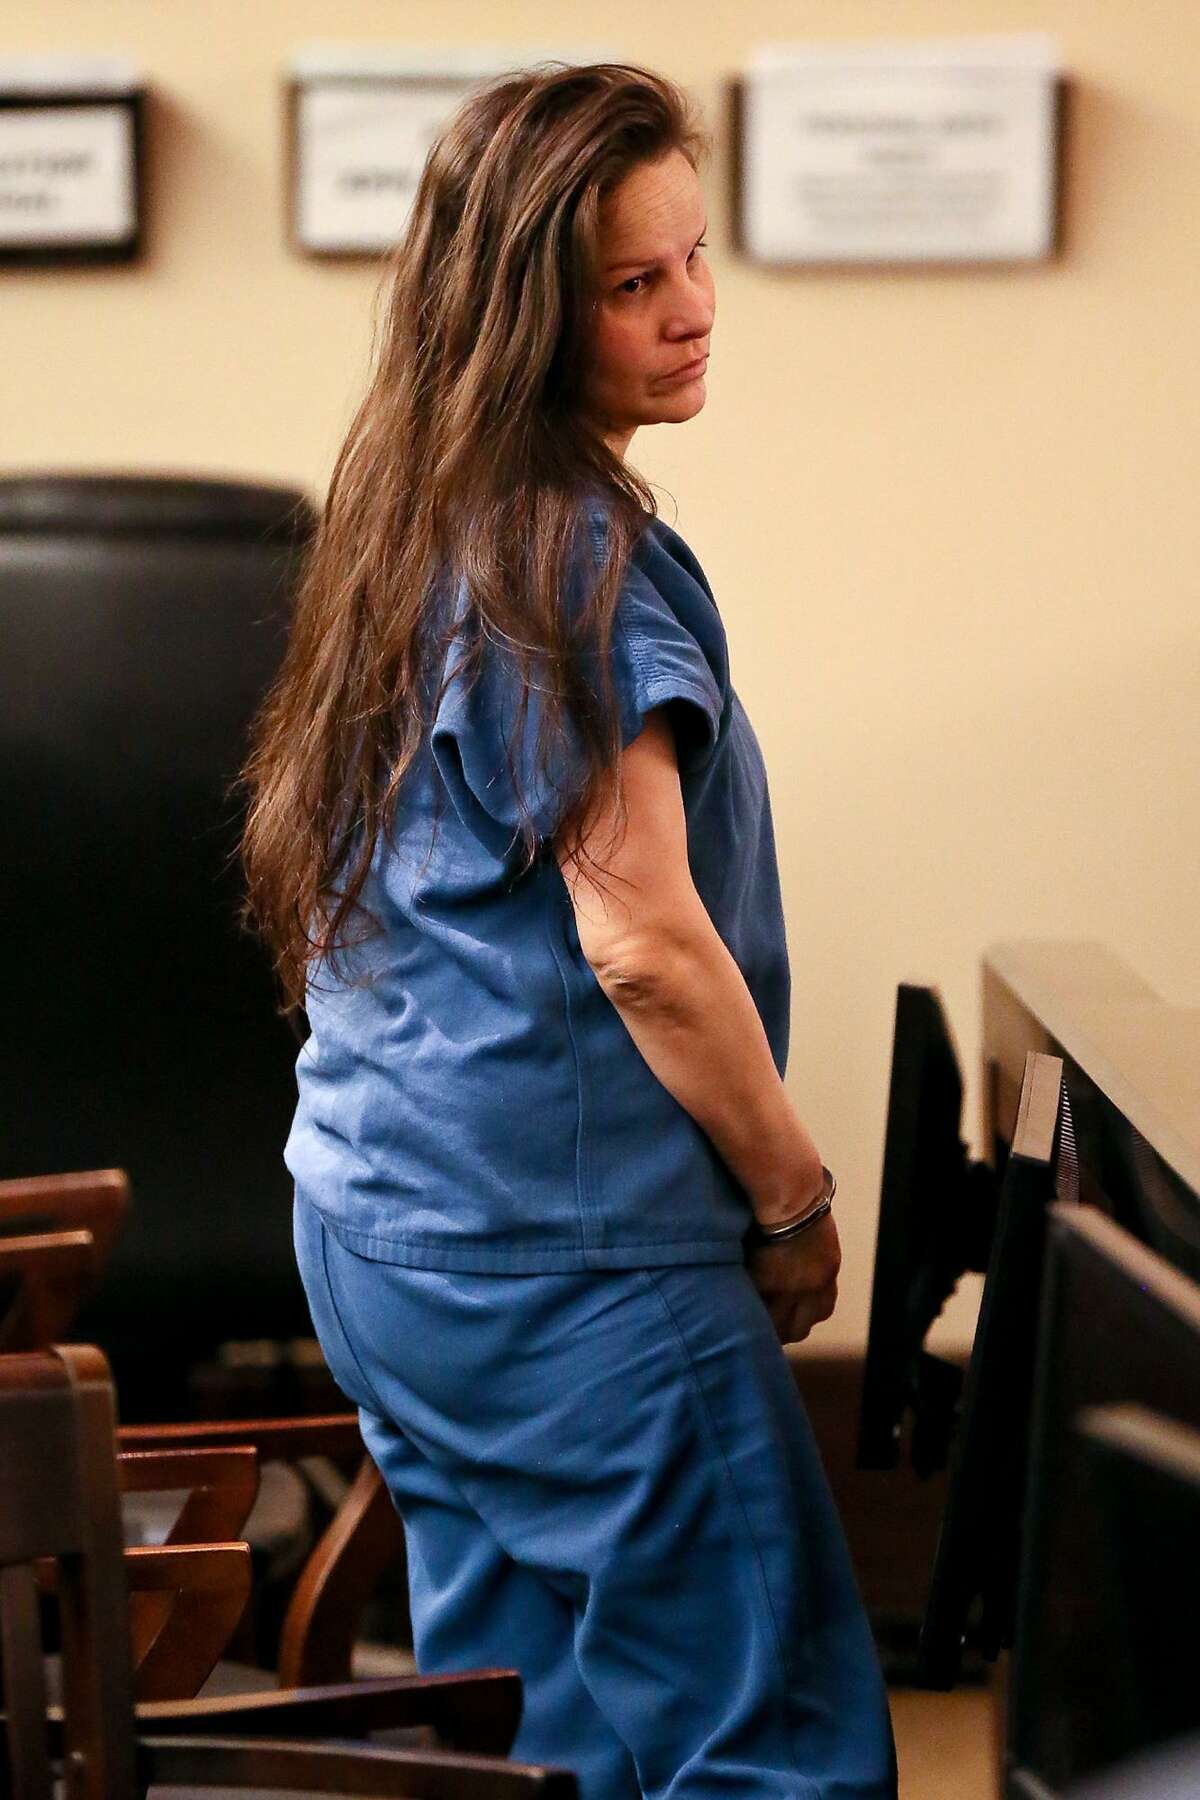 Candie Dominguez, the last co-defendant in the killing of Jose Luis Menchaca, who was beaten, dismembered and his body parts burned on a barbeque grill, enters the courtroom for sentencing in 379th state District Court, presided by Judge Ron Rangel, on Monday, Feb. 4, 2019. Dominguez received a sentence of 30 years as agreed to in a plea deal in exchange for testimony in the Daniel Lopez murder case.